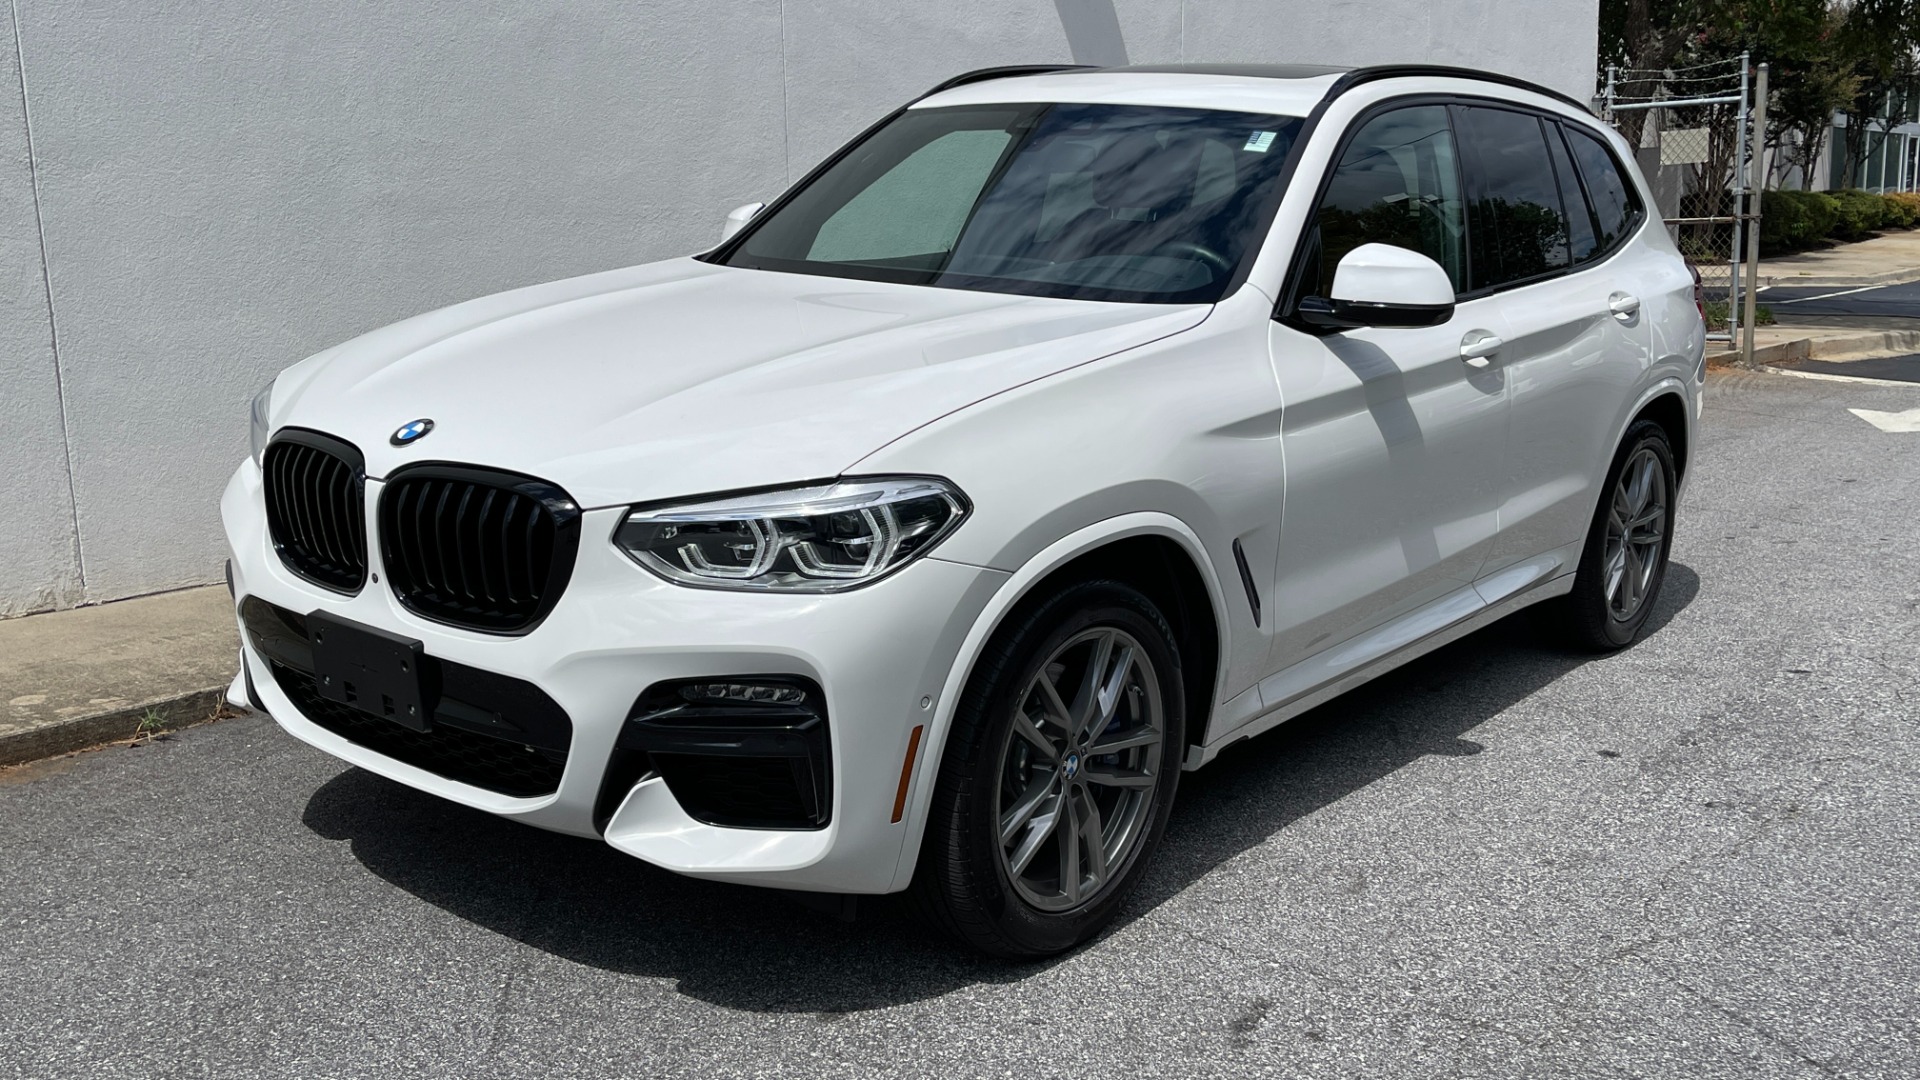 Used 2021 BMW X3 M40i / EXECUTIVE PACKAGE / SHADOWLINE TRIM / HEADS UP DISPLAY / AMBIENT LIG for sale $58,995 at Formula Imports in Charlotte NC 28227 1